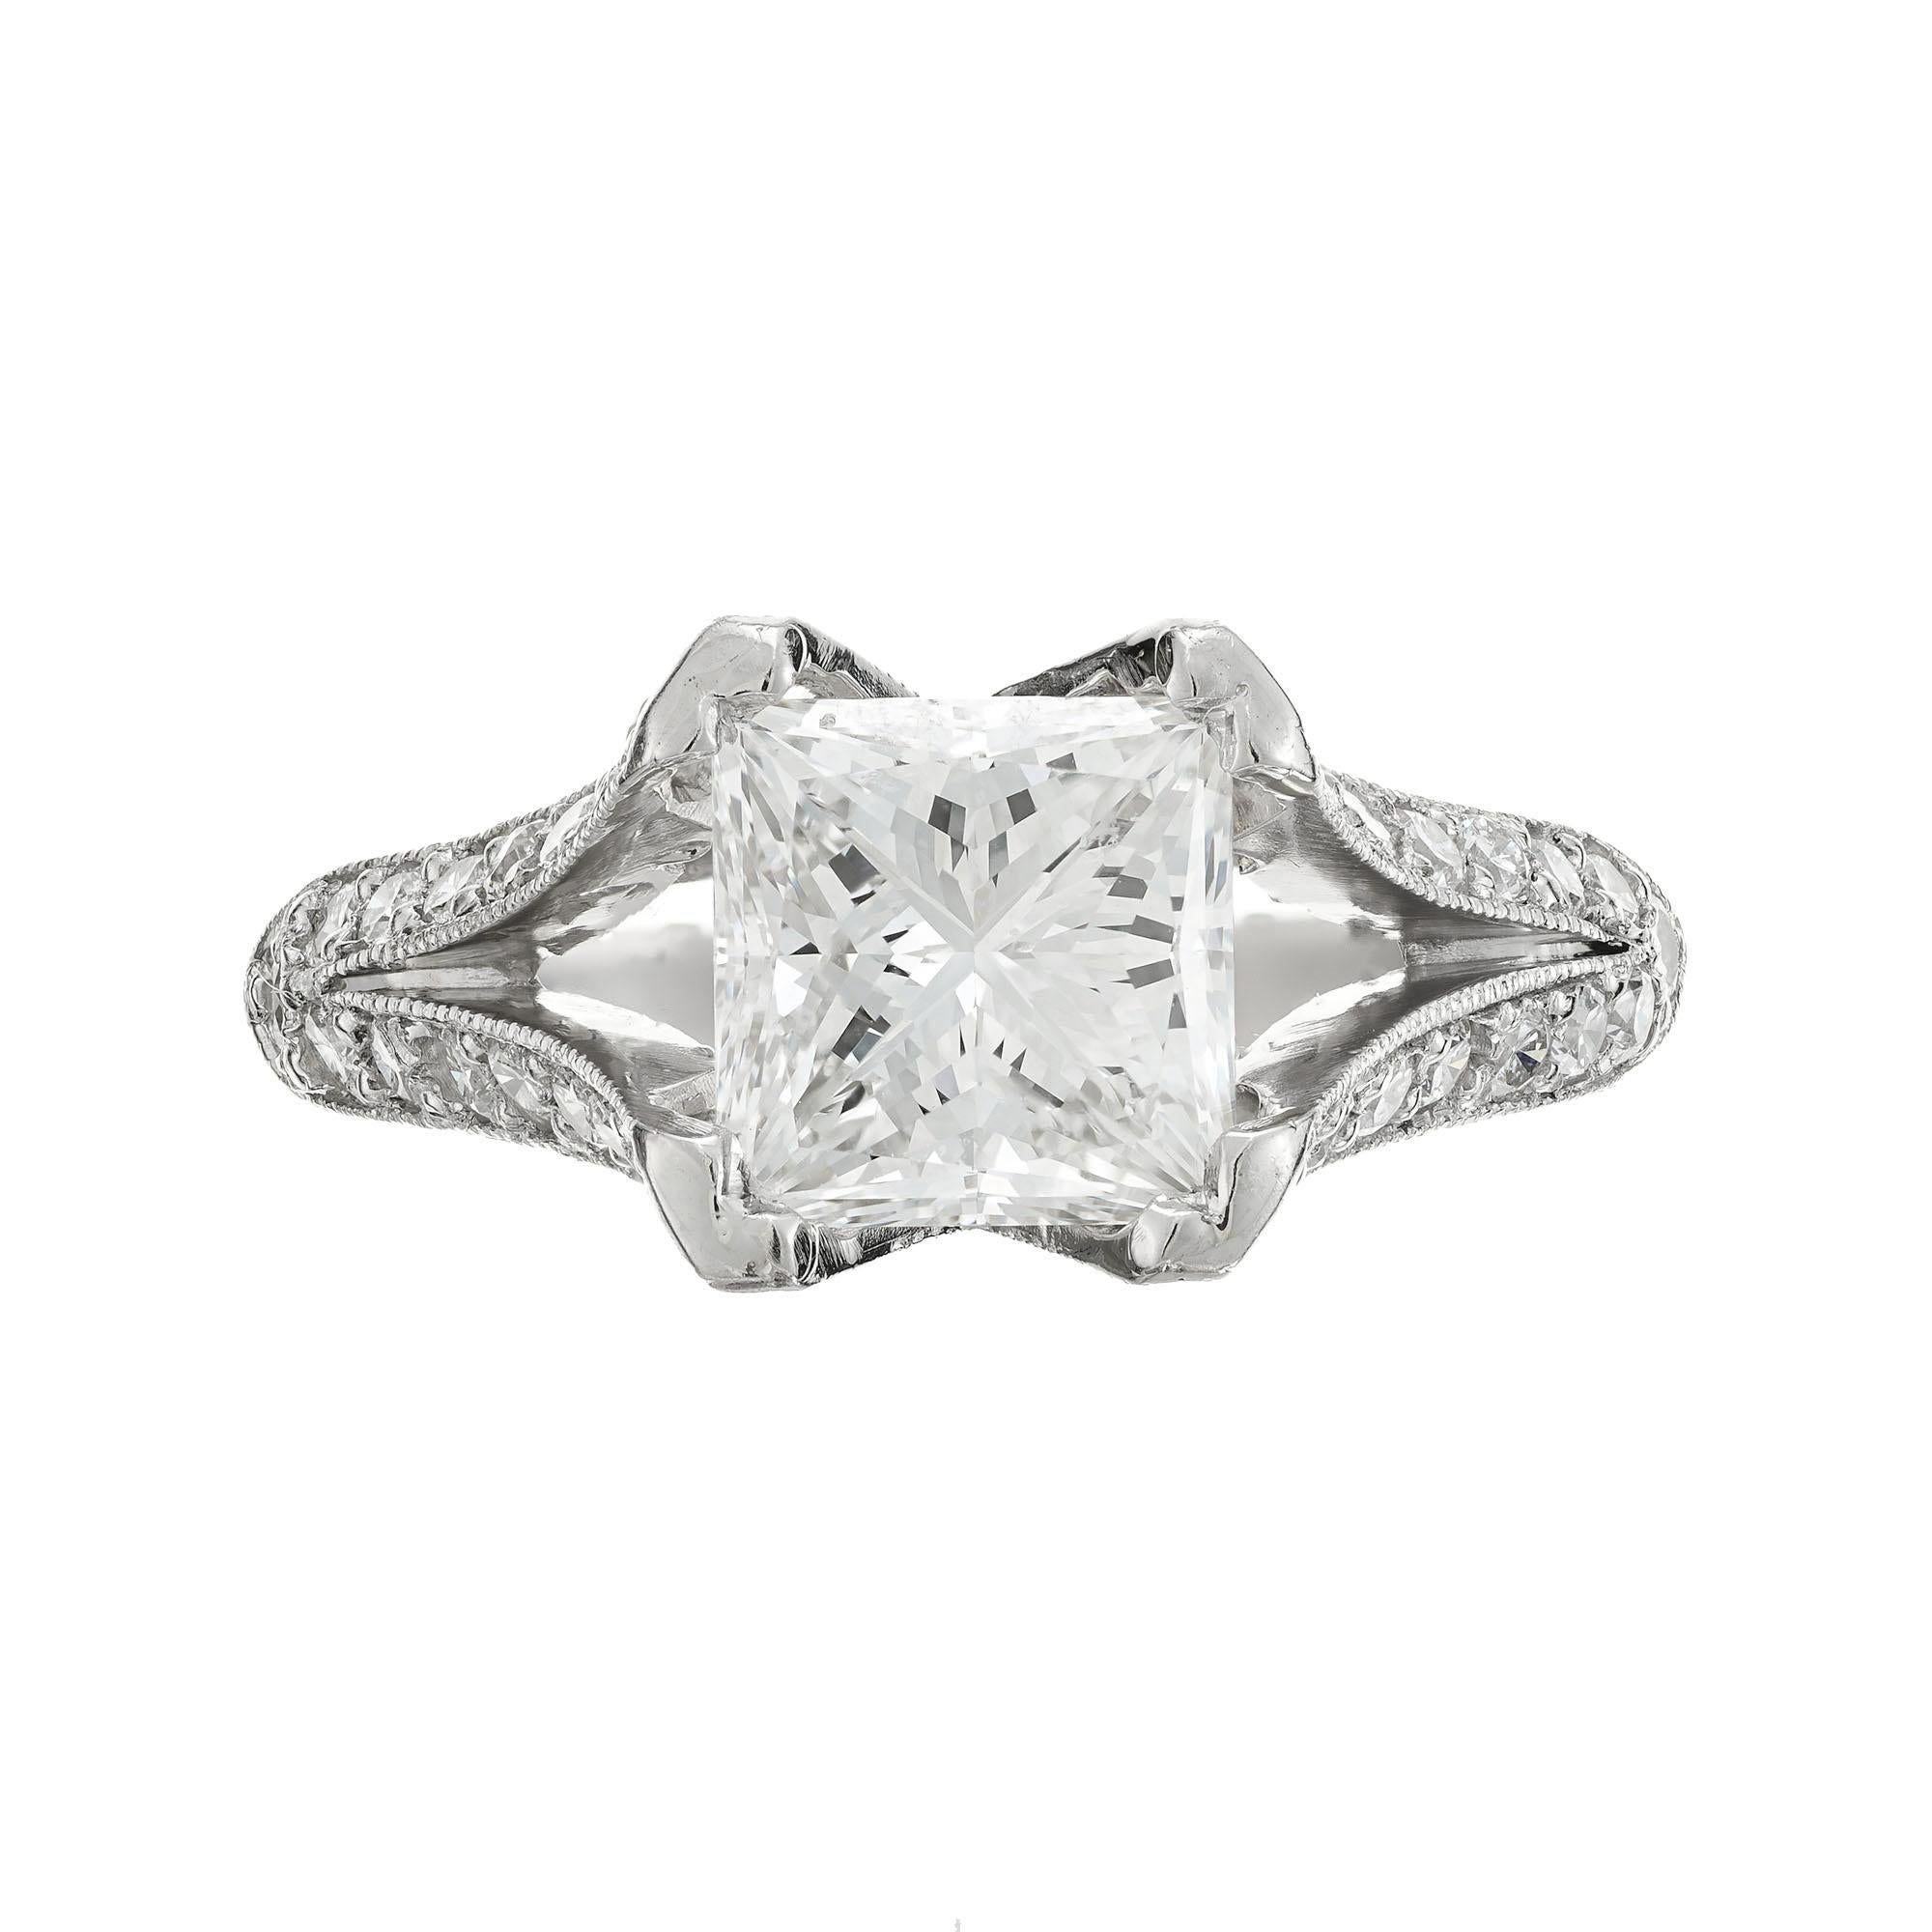 Diamond custom split shank engagement ring. Platinum shank with 44 round accent diamonds along the split shank. Suspension setting holds the diamond to show off its sparkle. The corners of the diamond are protected by the rounded edges.  GIA